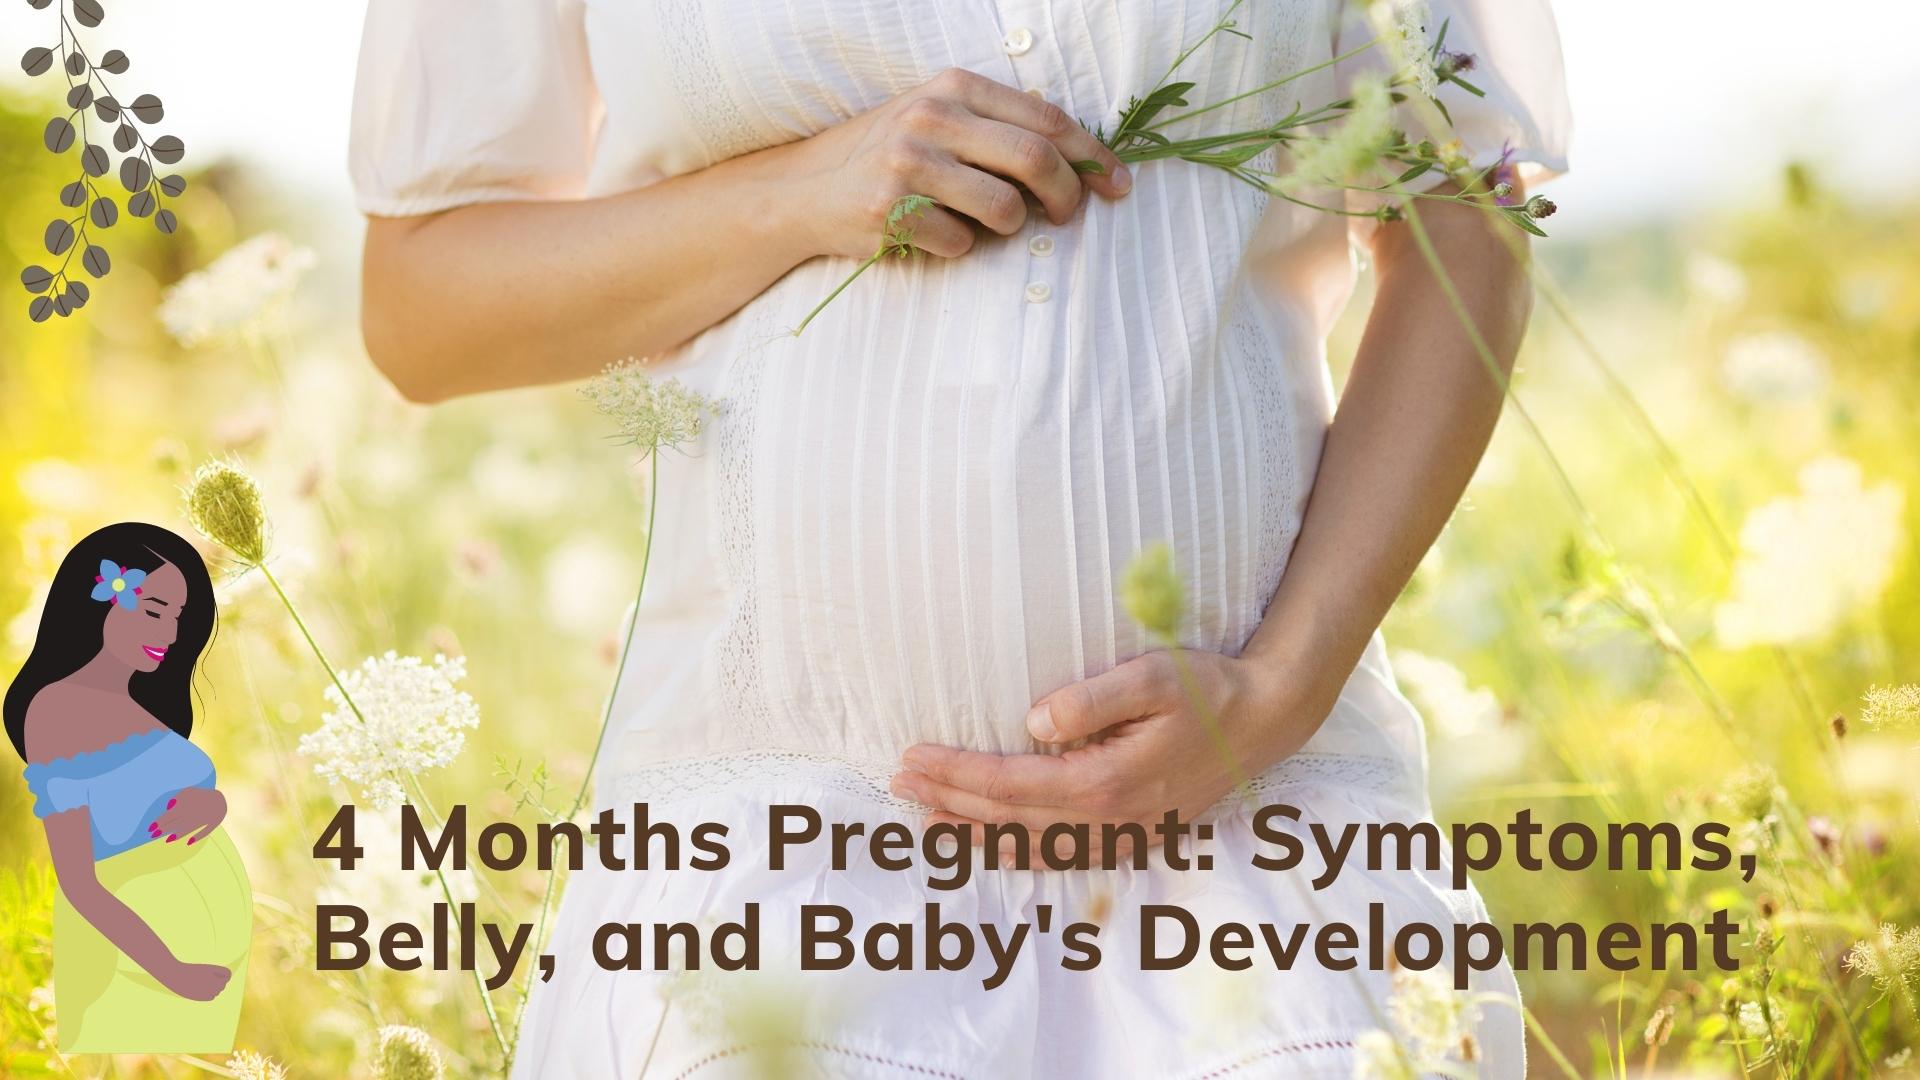 4 Months Pregnant Symptoms, Belly, and Baby's Development